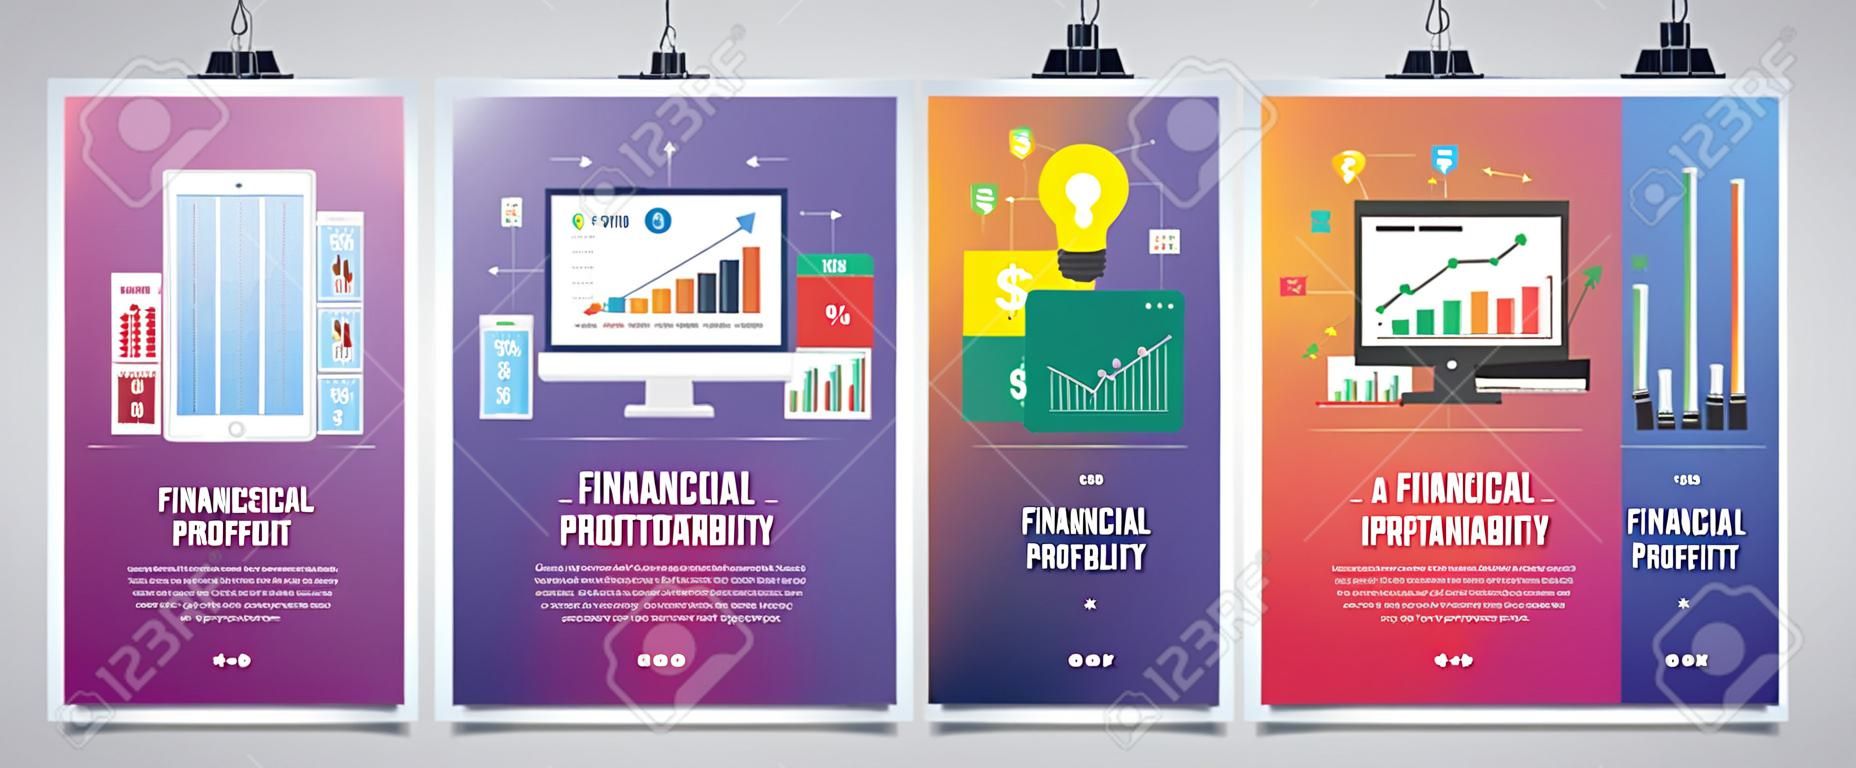 Web banners concept in vector with financial profitability, financial application, expertise investment and stock market investor. Internet website banner concept with icon set. Flat design vector illustration.